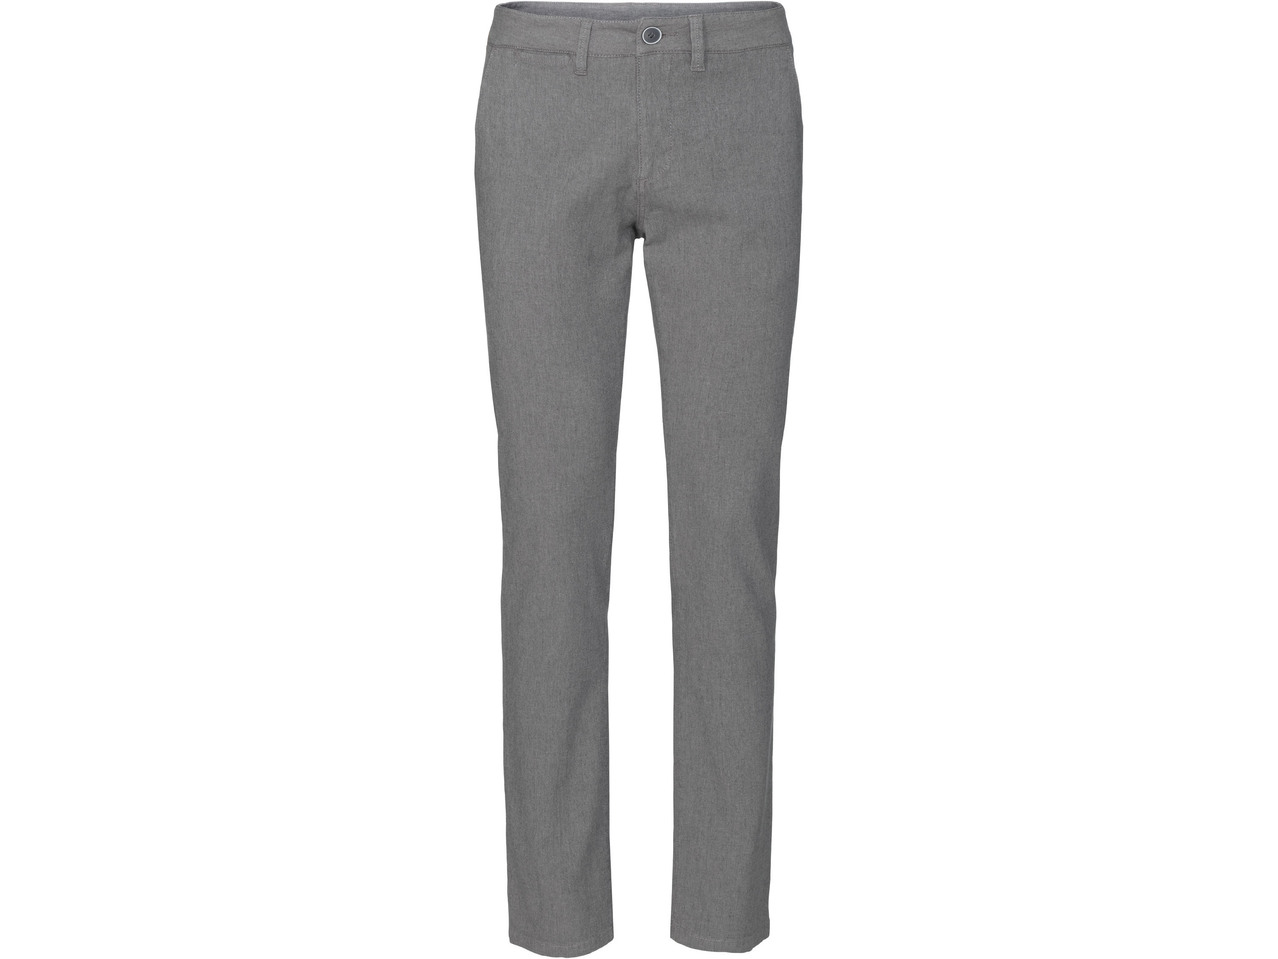 Men's "Slim Fit" Chino Trousers